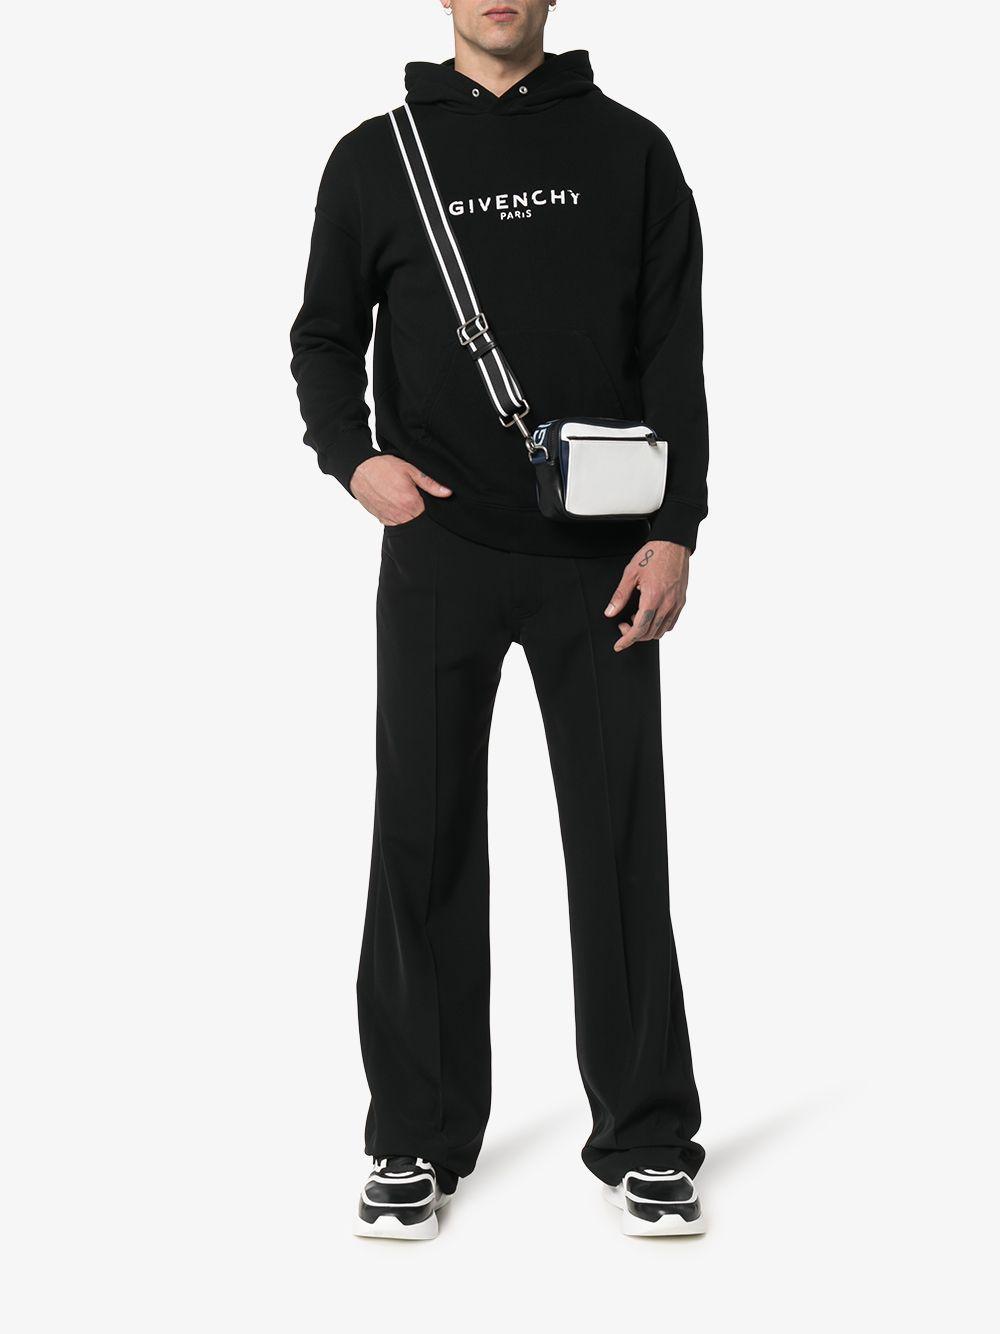 Givenchy Cotton Hoodie in Black for Men - Save 12% - Lyst